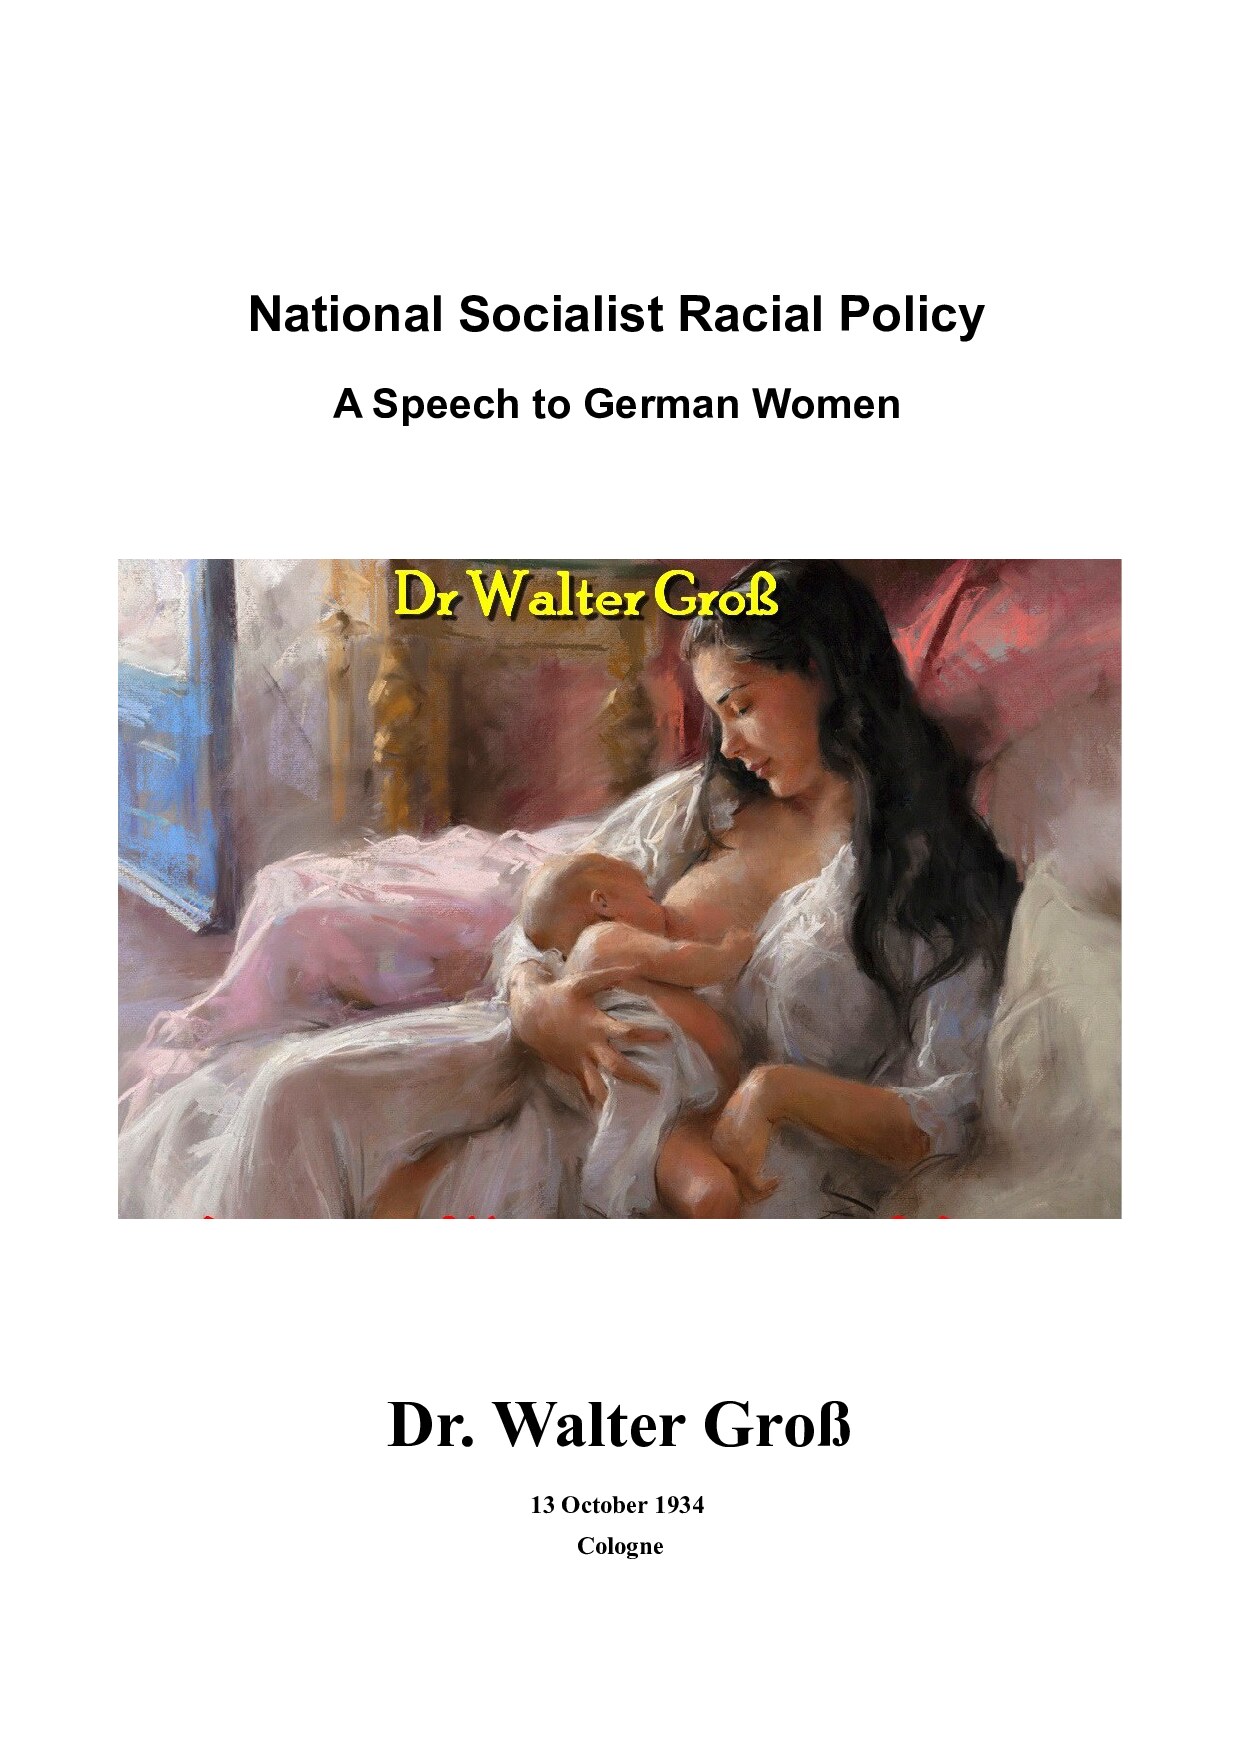 Gross, Walther; National Socialist Racial Policy